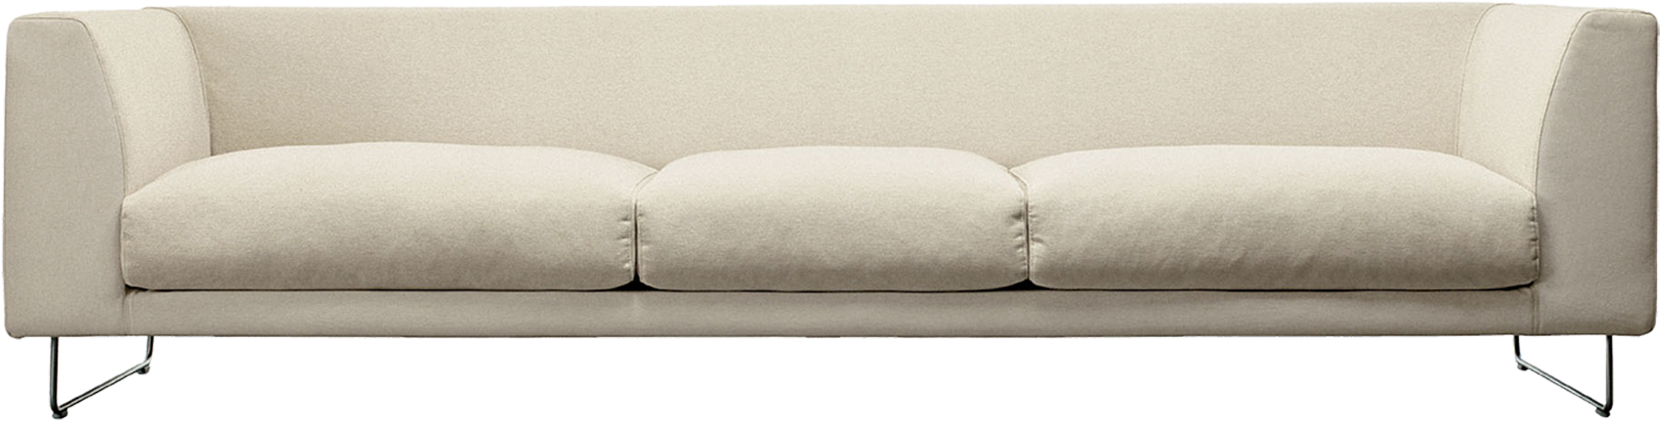 Sofa Png Image - Couch (1843x1024)